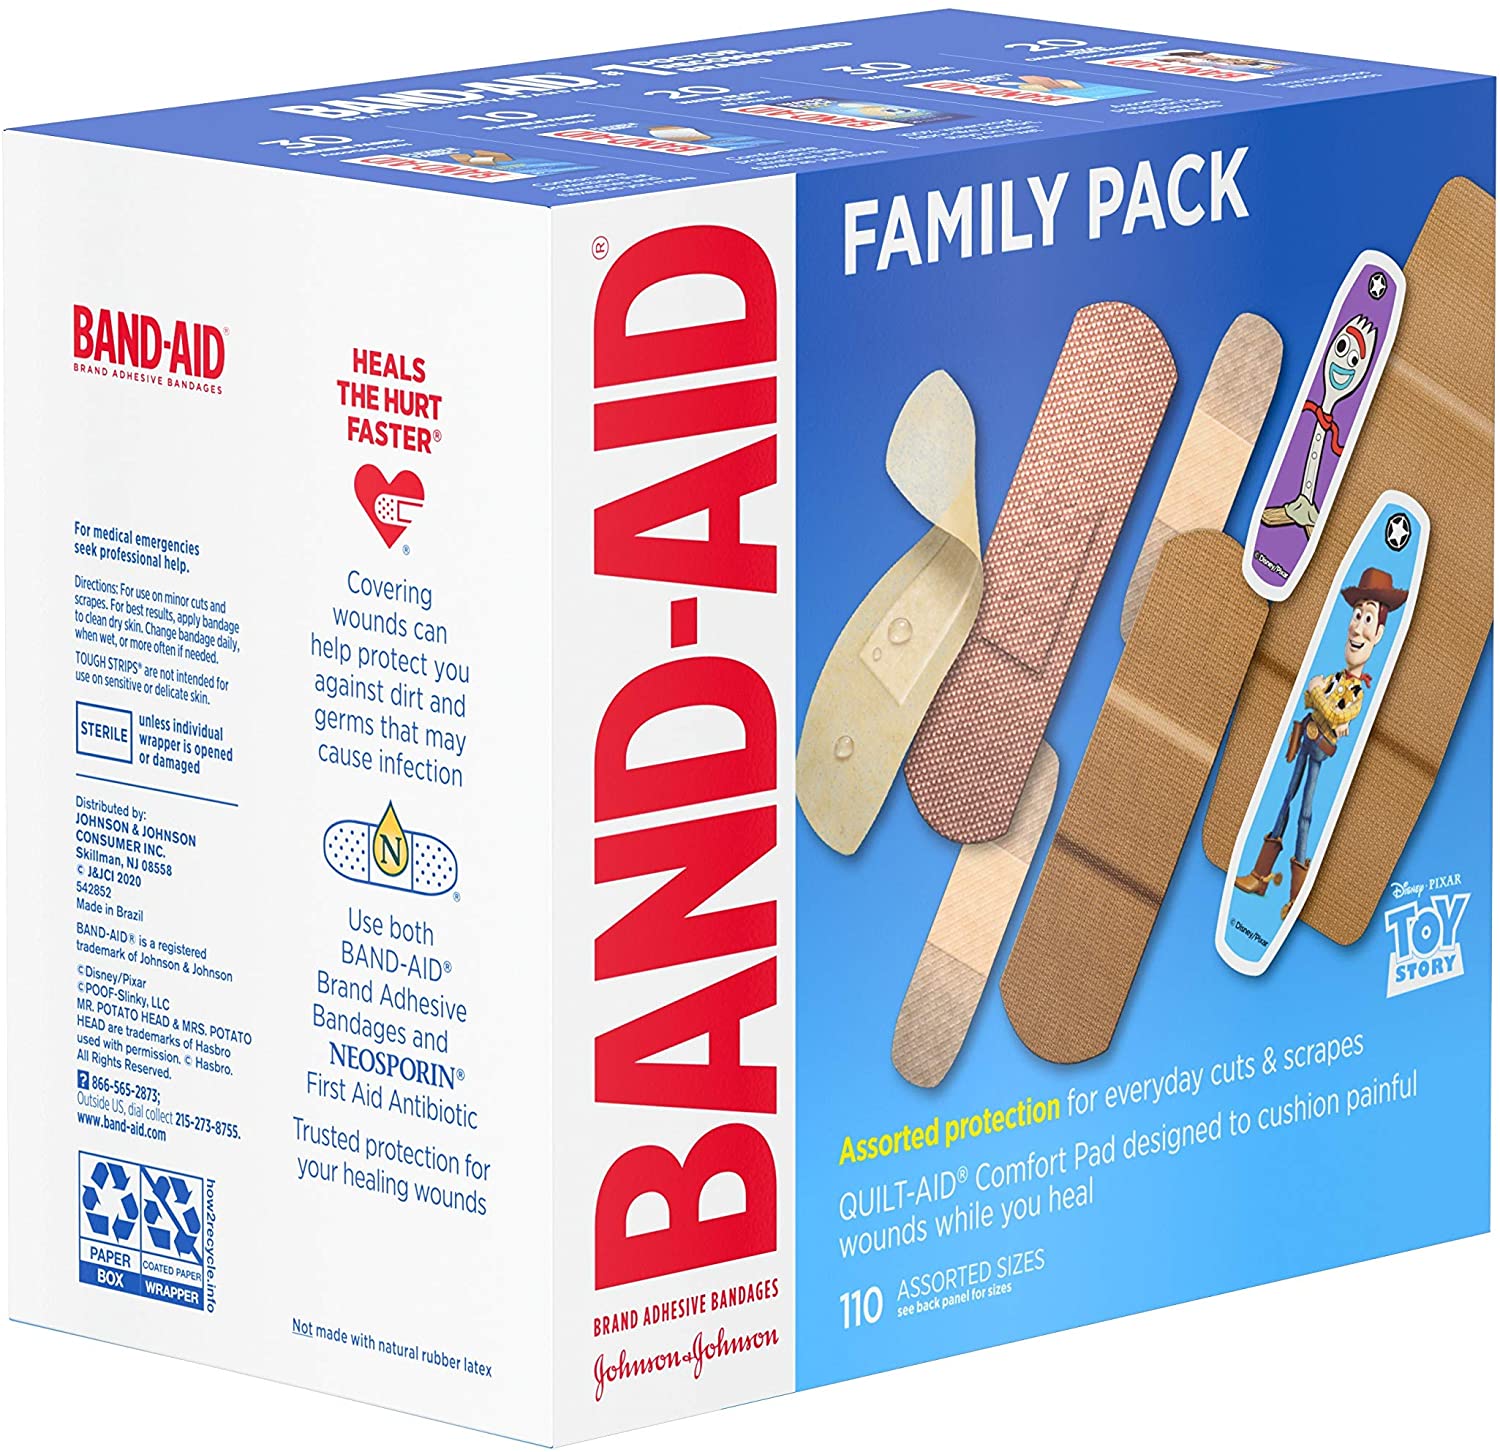 Band-Aid Adhesive Bandage Family Variety Pack in Assorted Sizes Featuring Water Block & Skin Flex, Flexible Fabric, Tough Strips & Pixar Character Bandages, 110 Count - $5.48